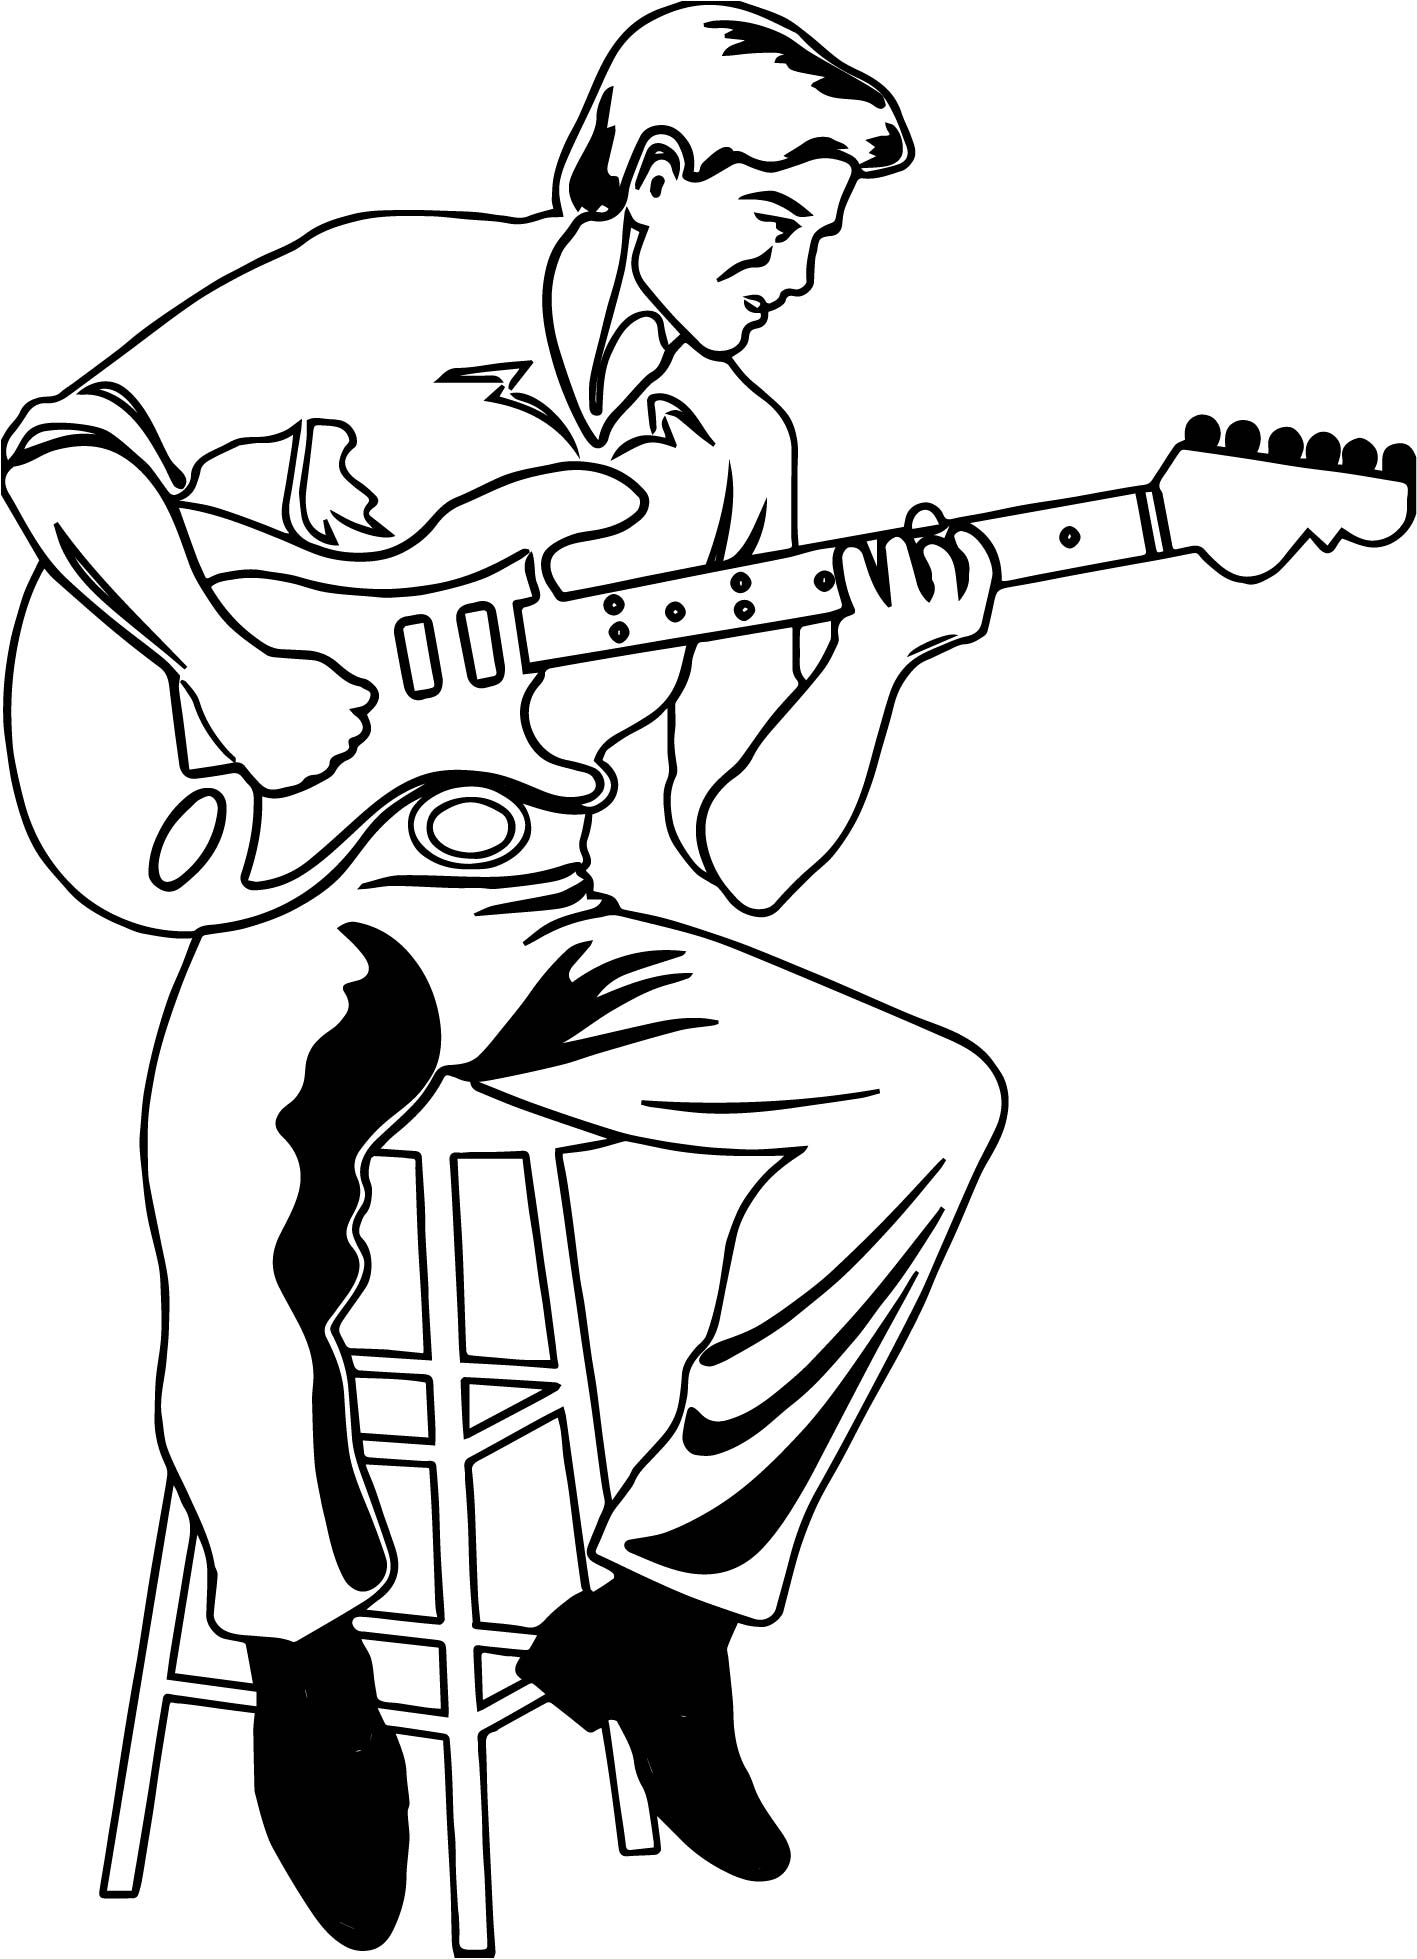 Illustration A Man Playing An Electric Playing The Guitar Coloring Page